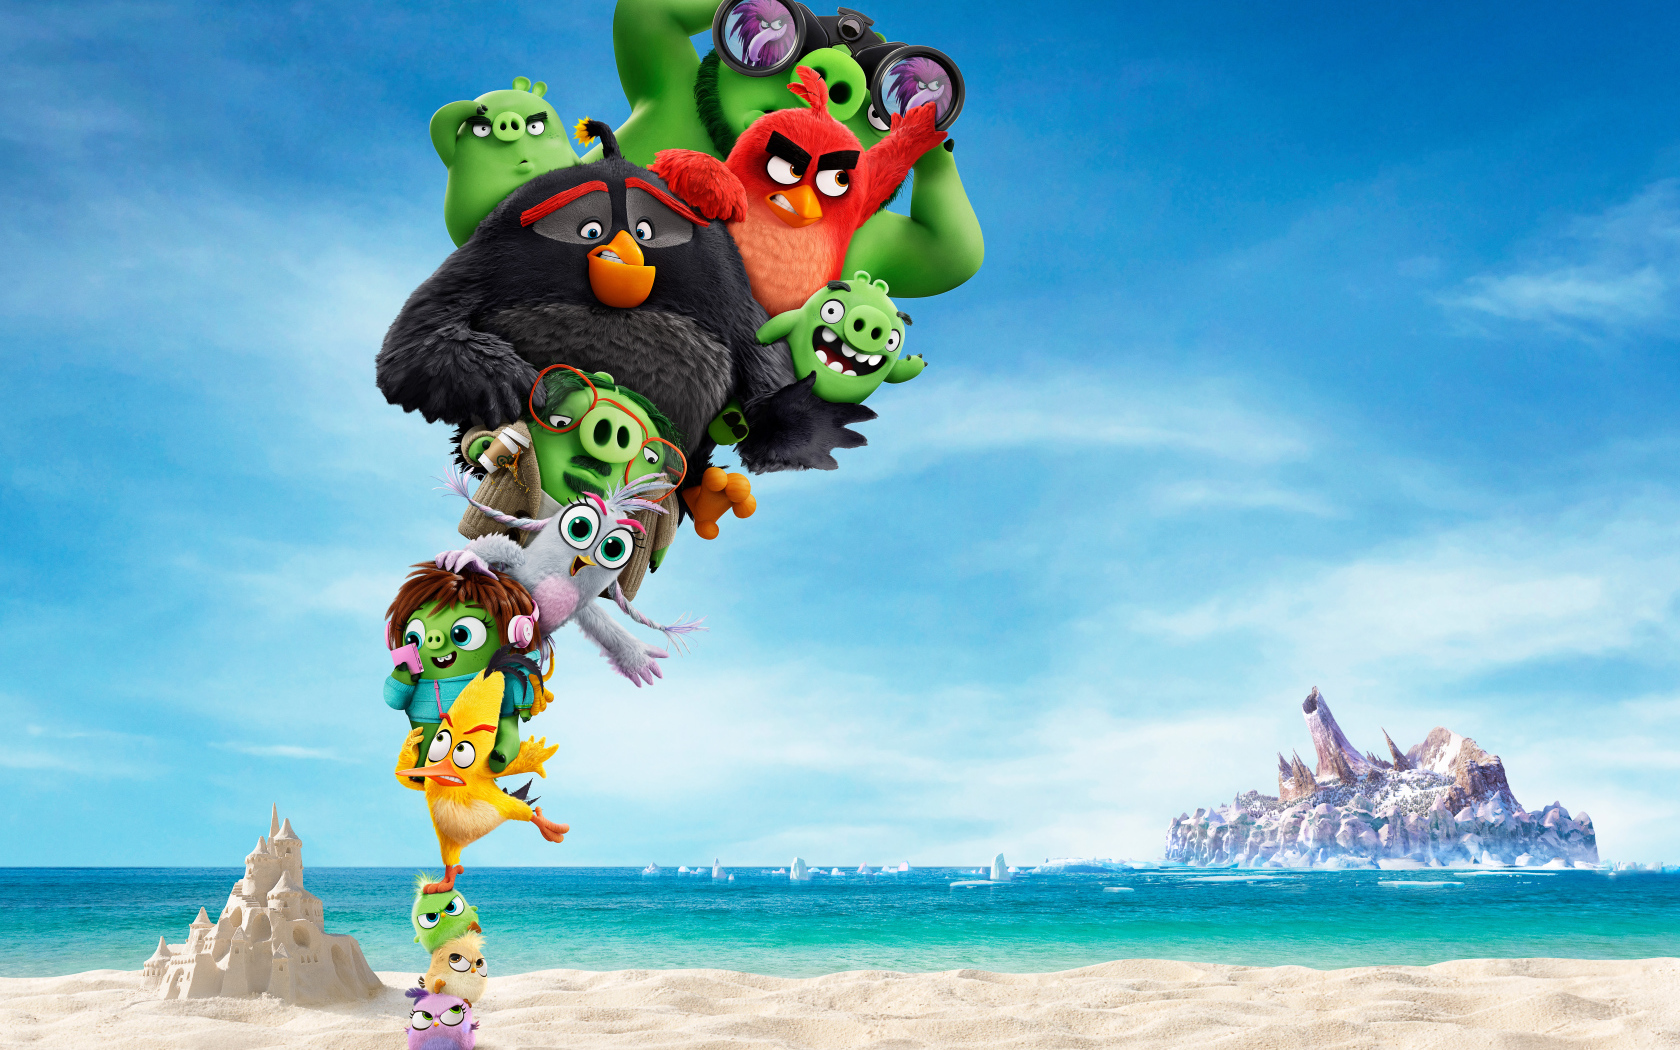 Angry Birds 2 Cartoon Characters In The Sand Cinema